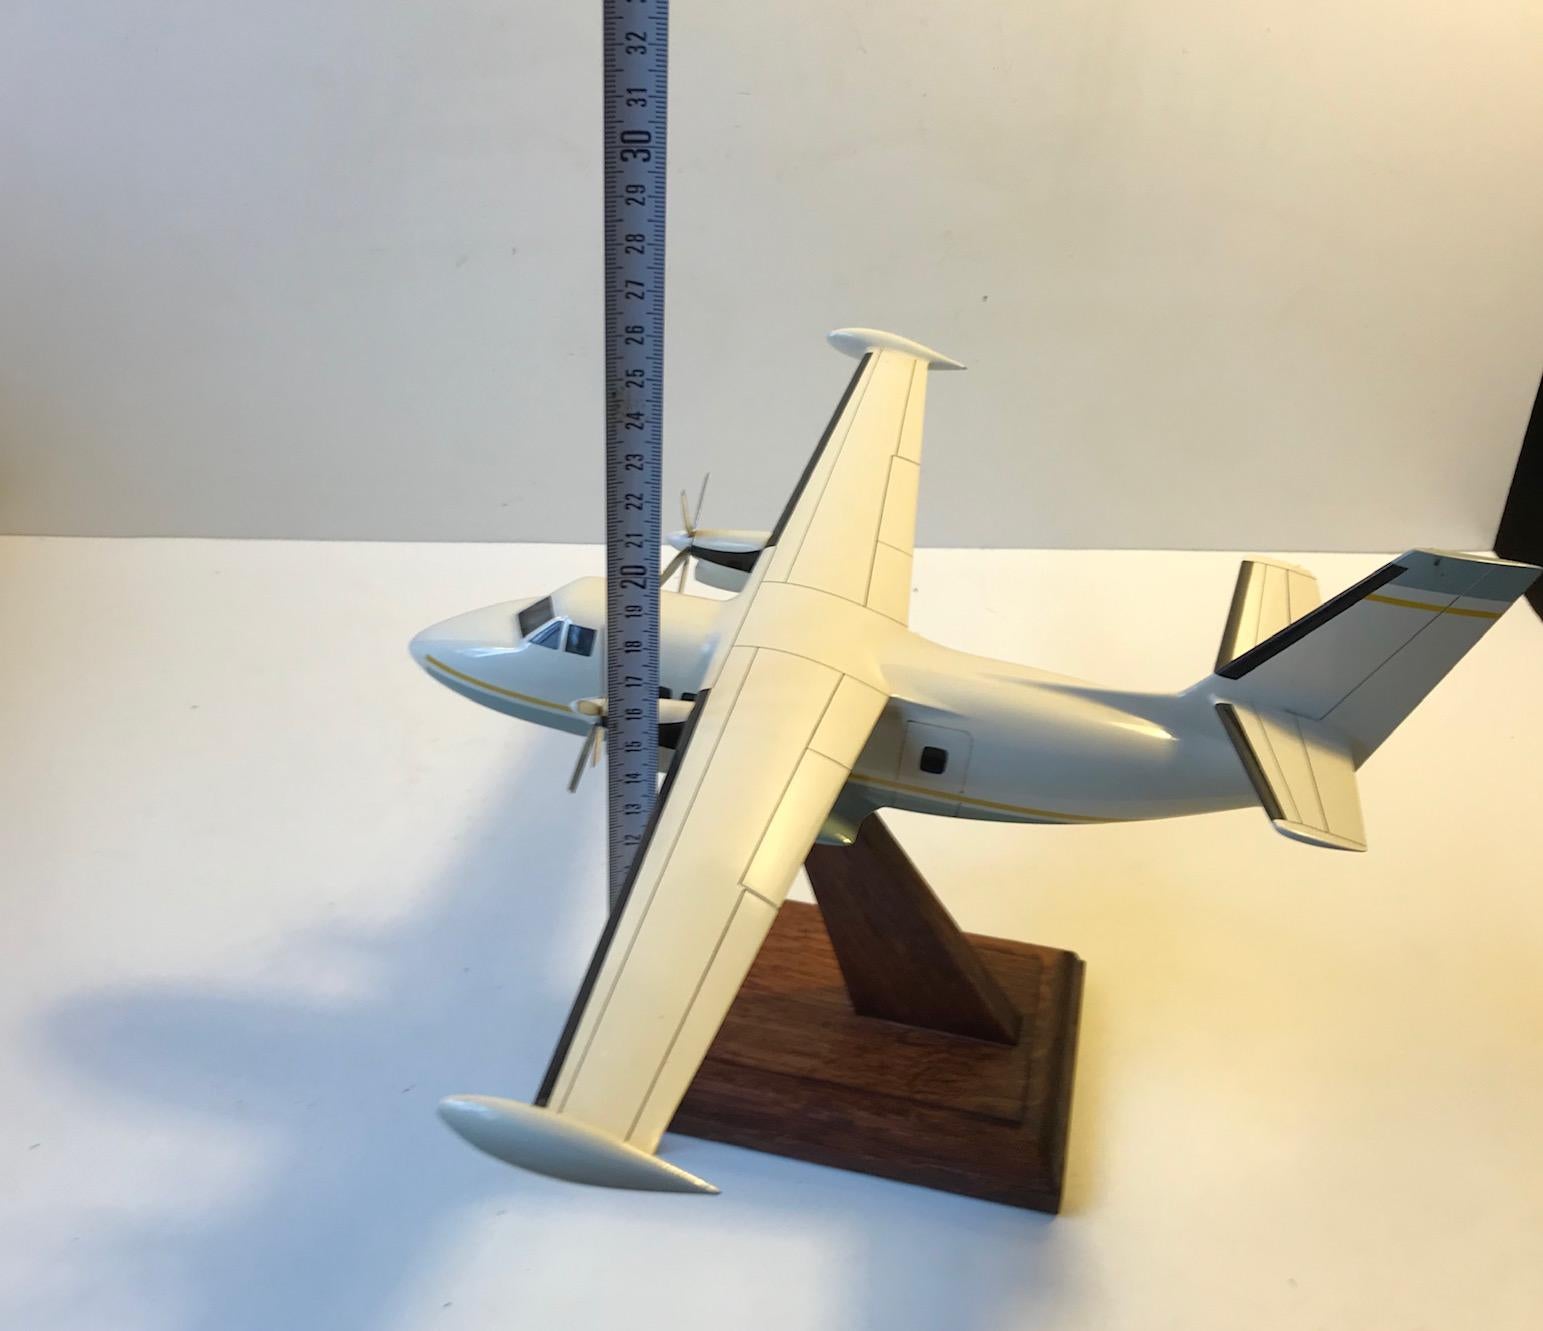 Late 20th Century Vintage Desk Model Airplane, Private Jet, Scandinavia, 1970s For Sale